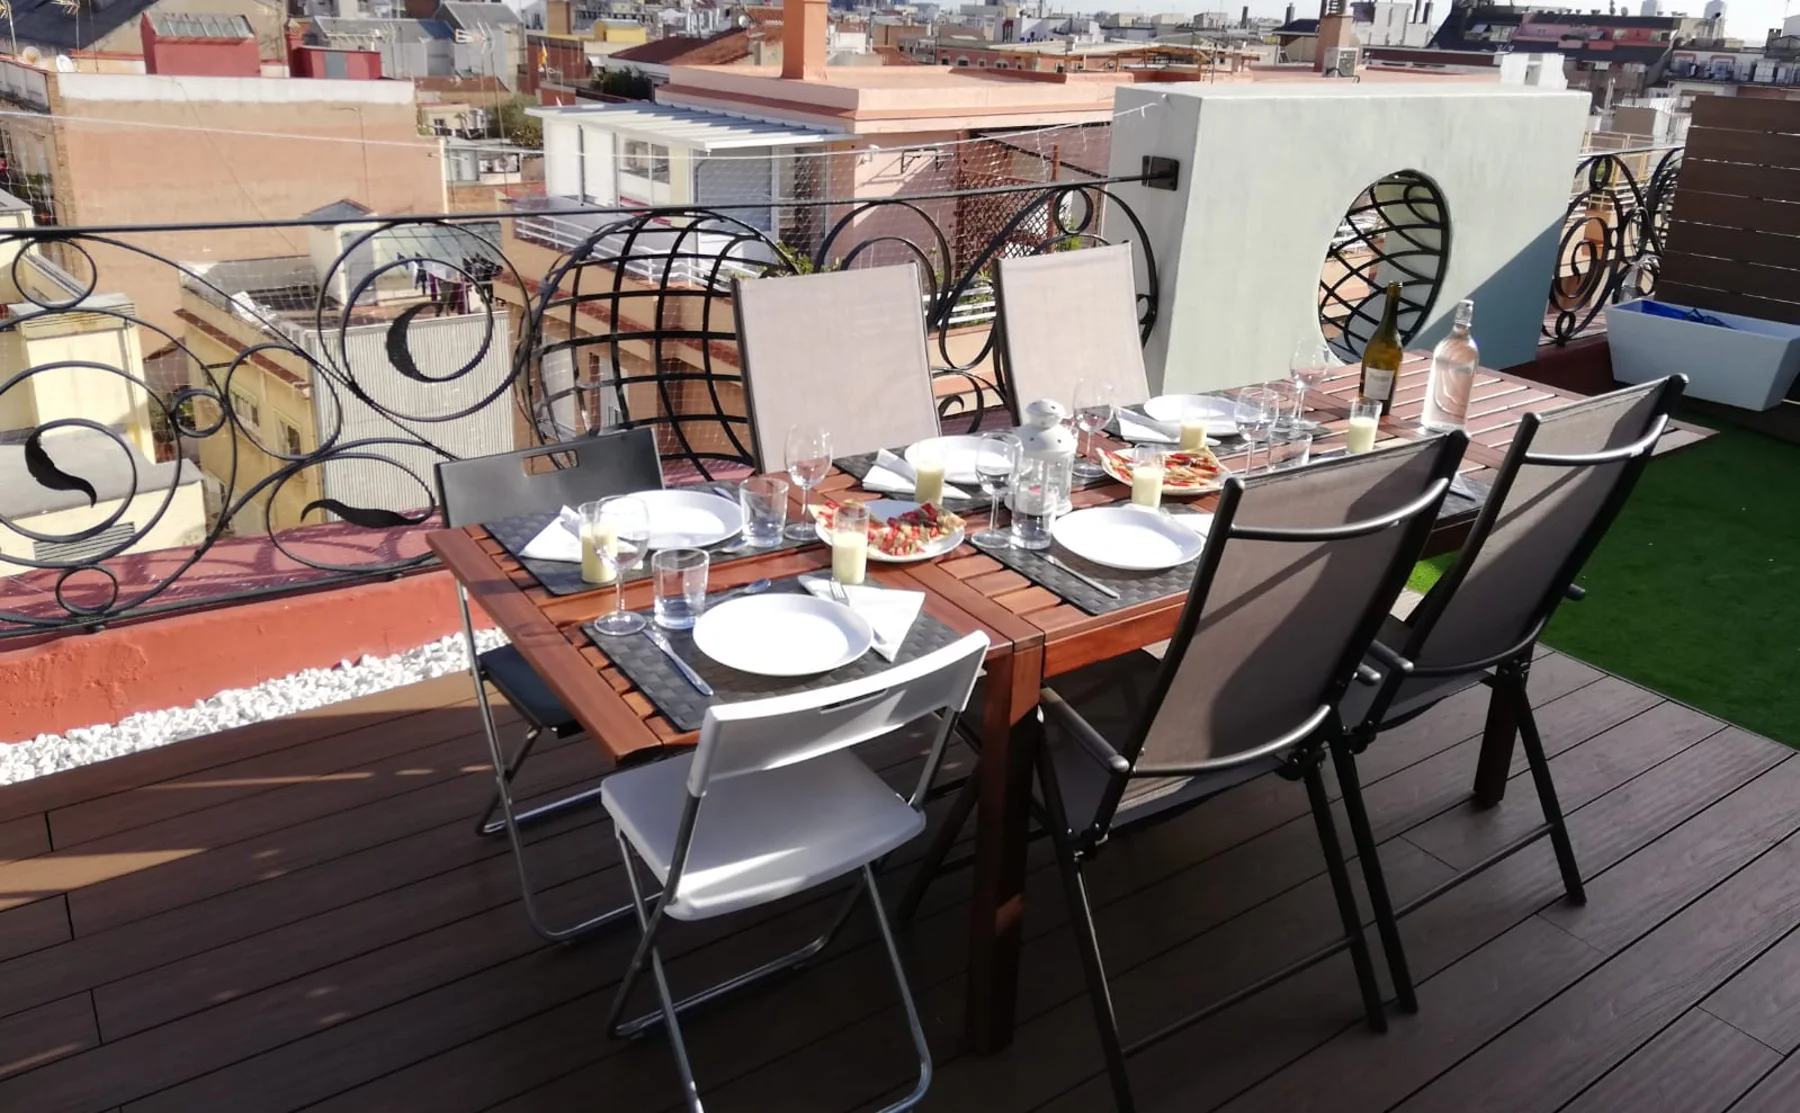 Paella showcooking on a rooftop with BCN views - 1364338